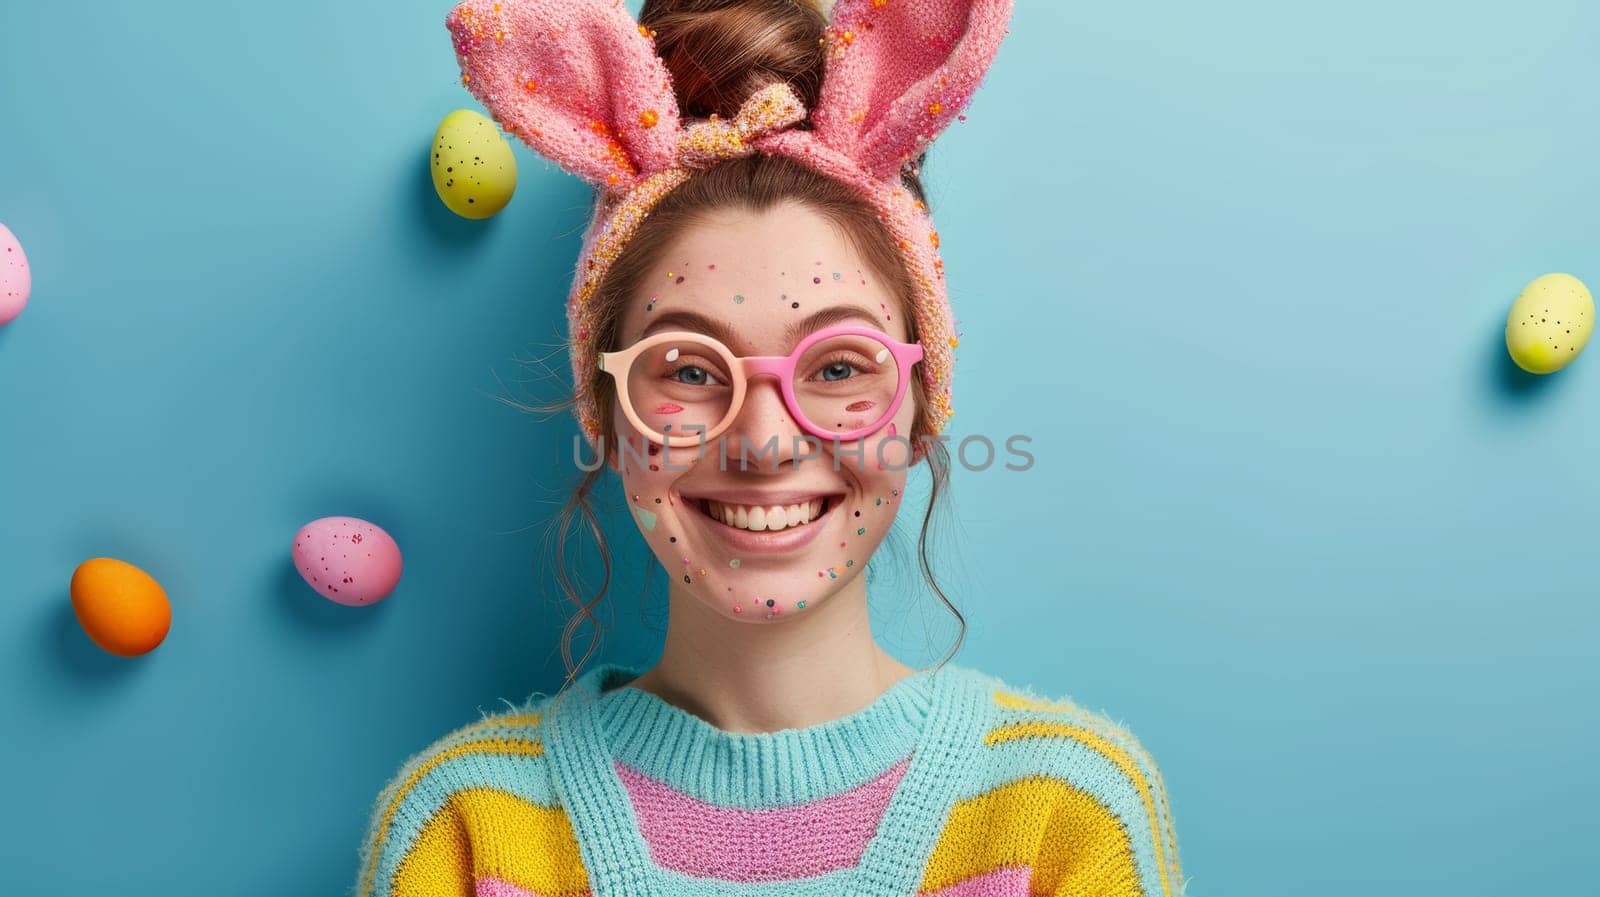 A woman with bunny ears and a pink bow on her head